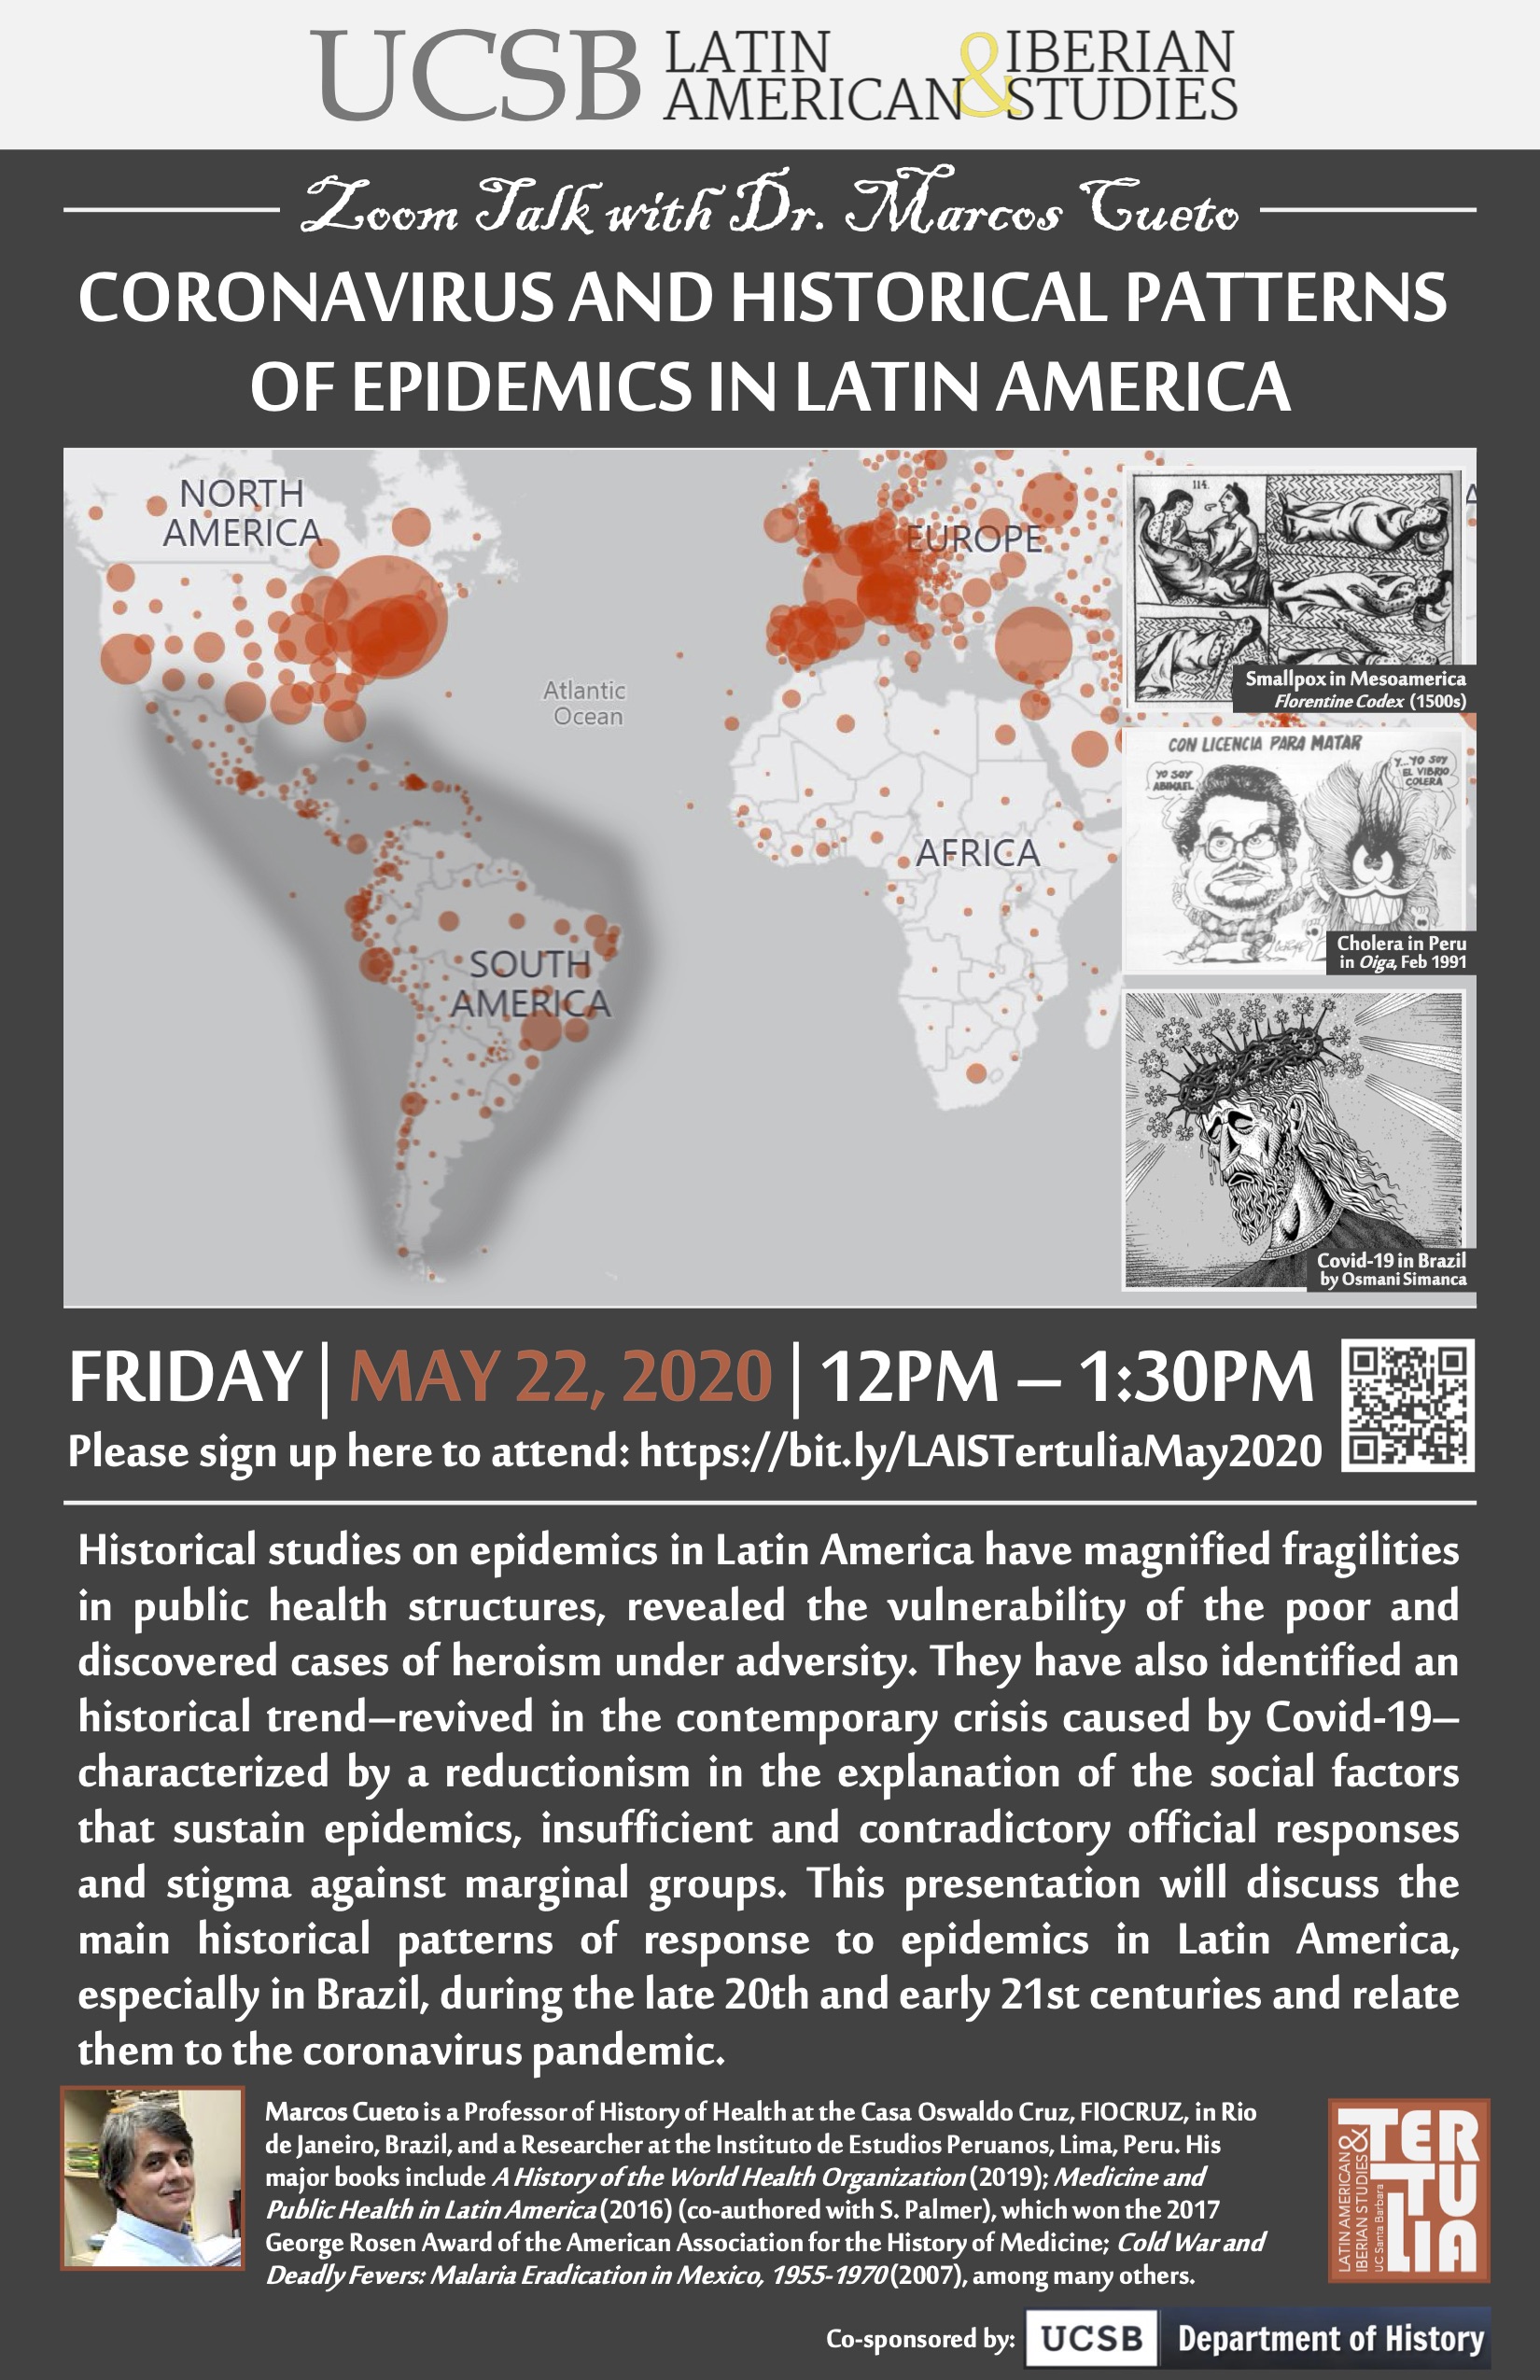 Flyer for Zoom Talk for Coronavirus and Historical Patterns of Epidemics in Latin America on 5/22/20 from 12-1:30PM